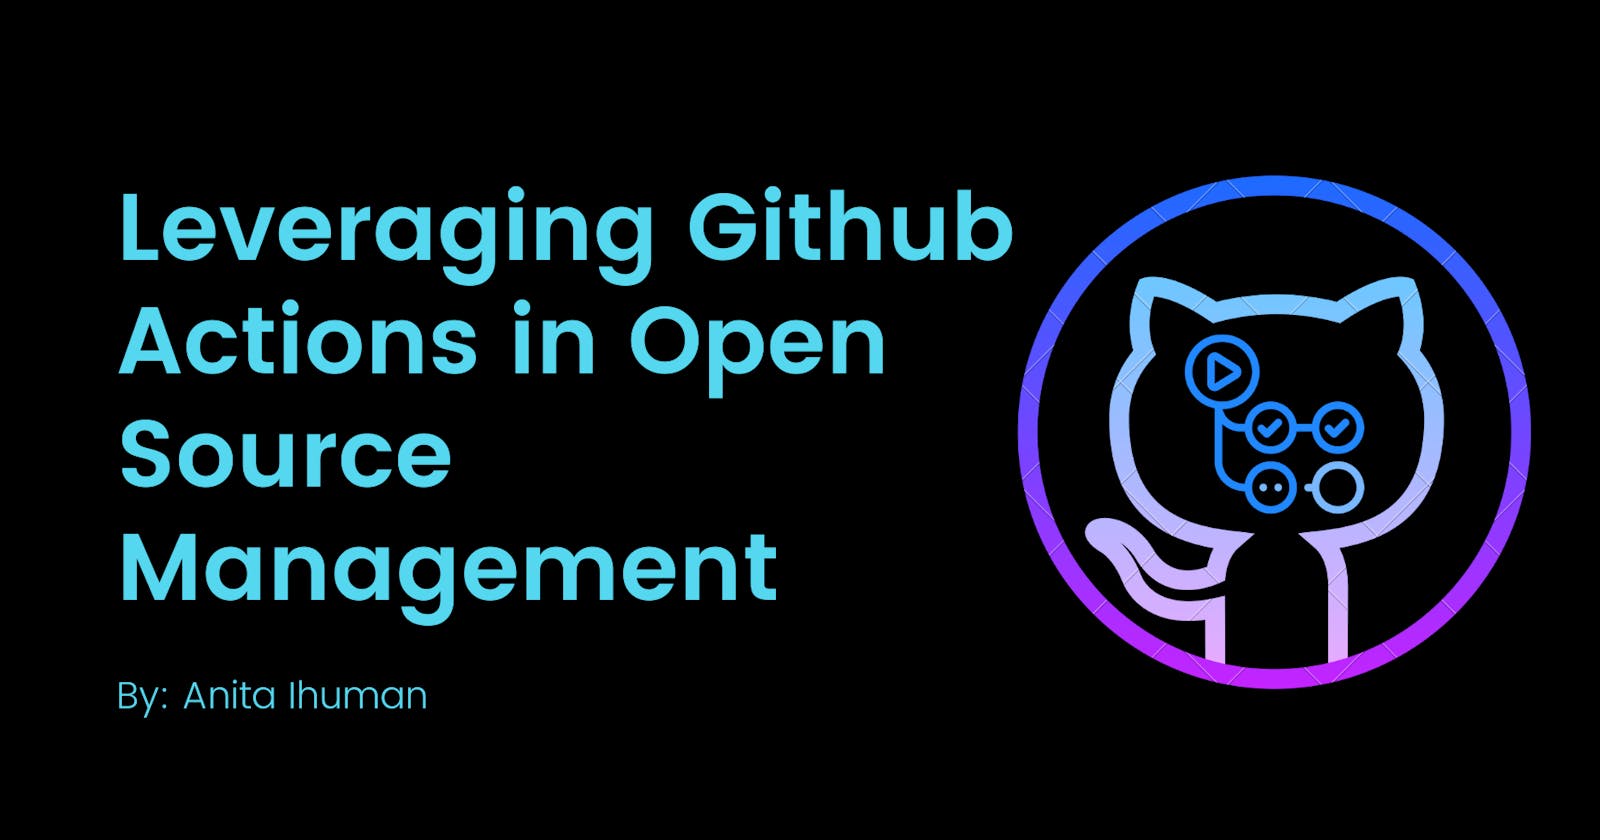 Recounts of my Session at GitHub Africa Virtual Meetup